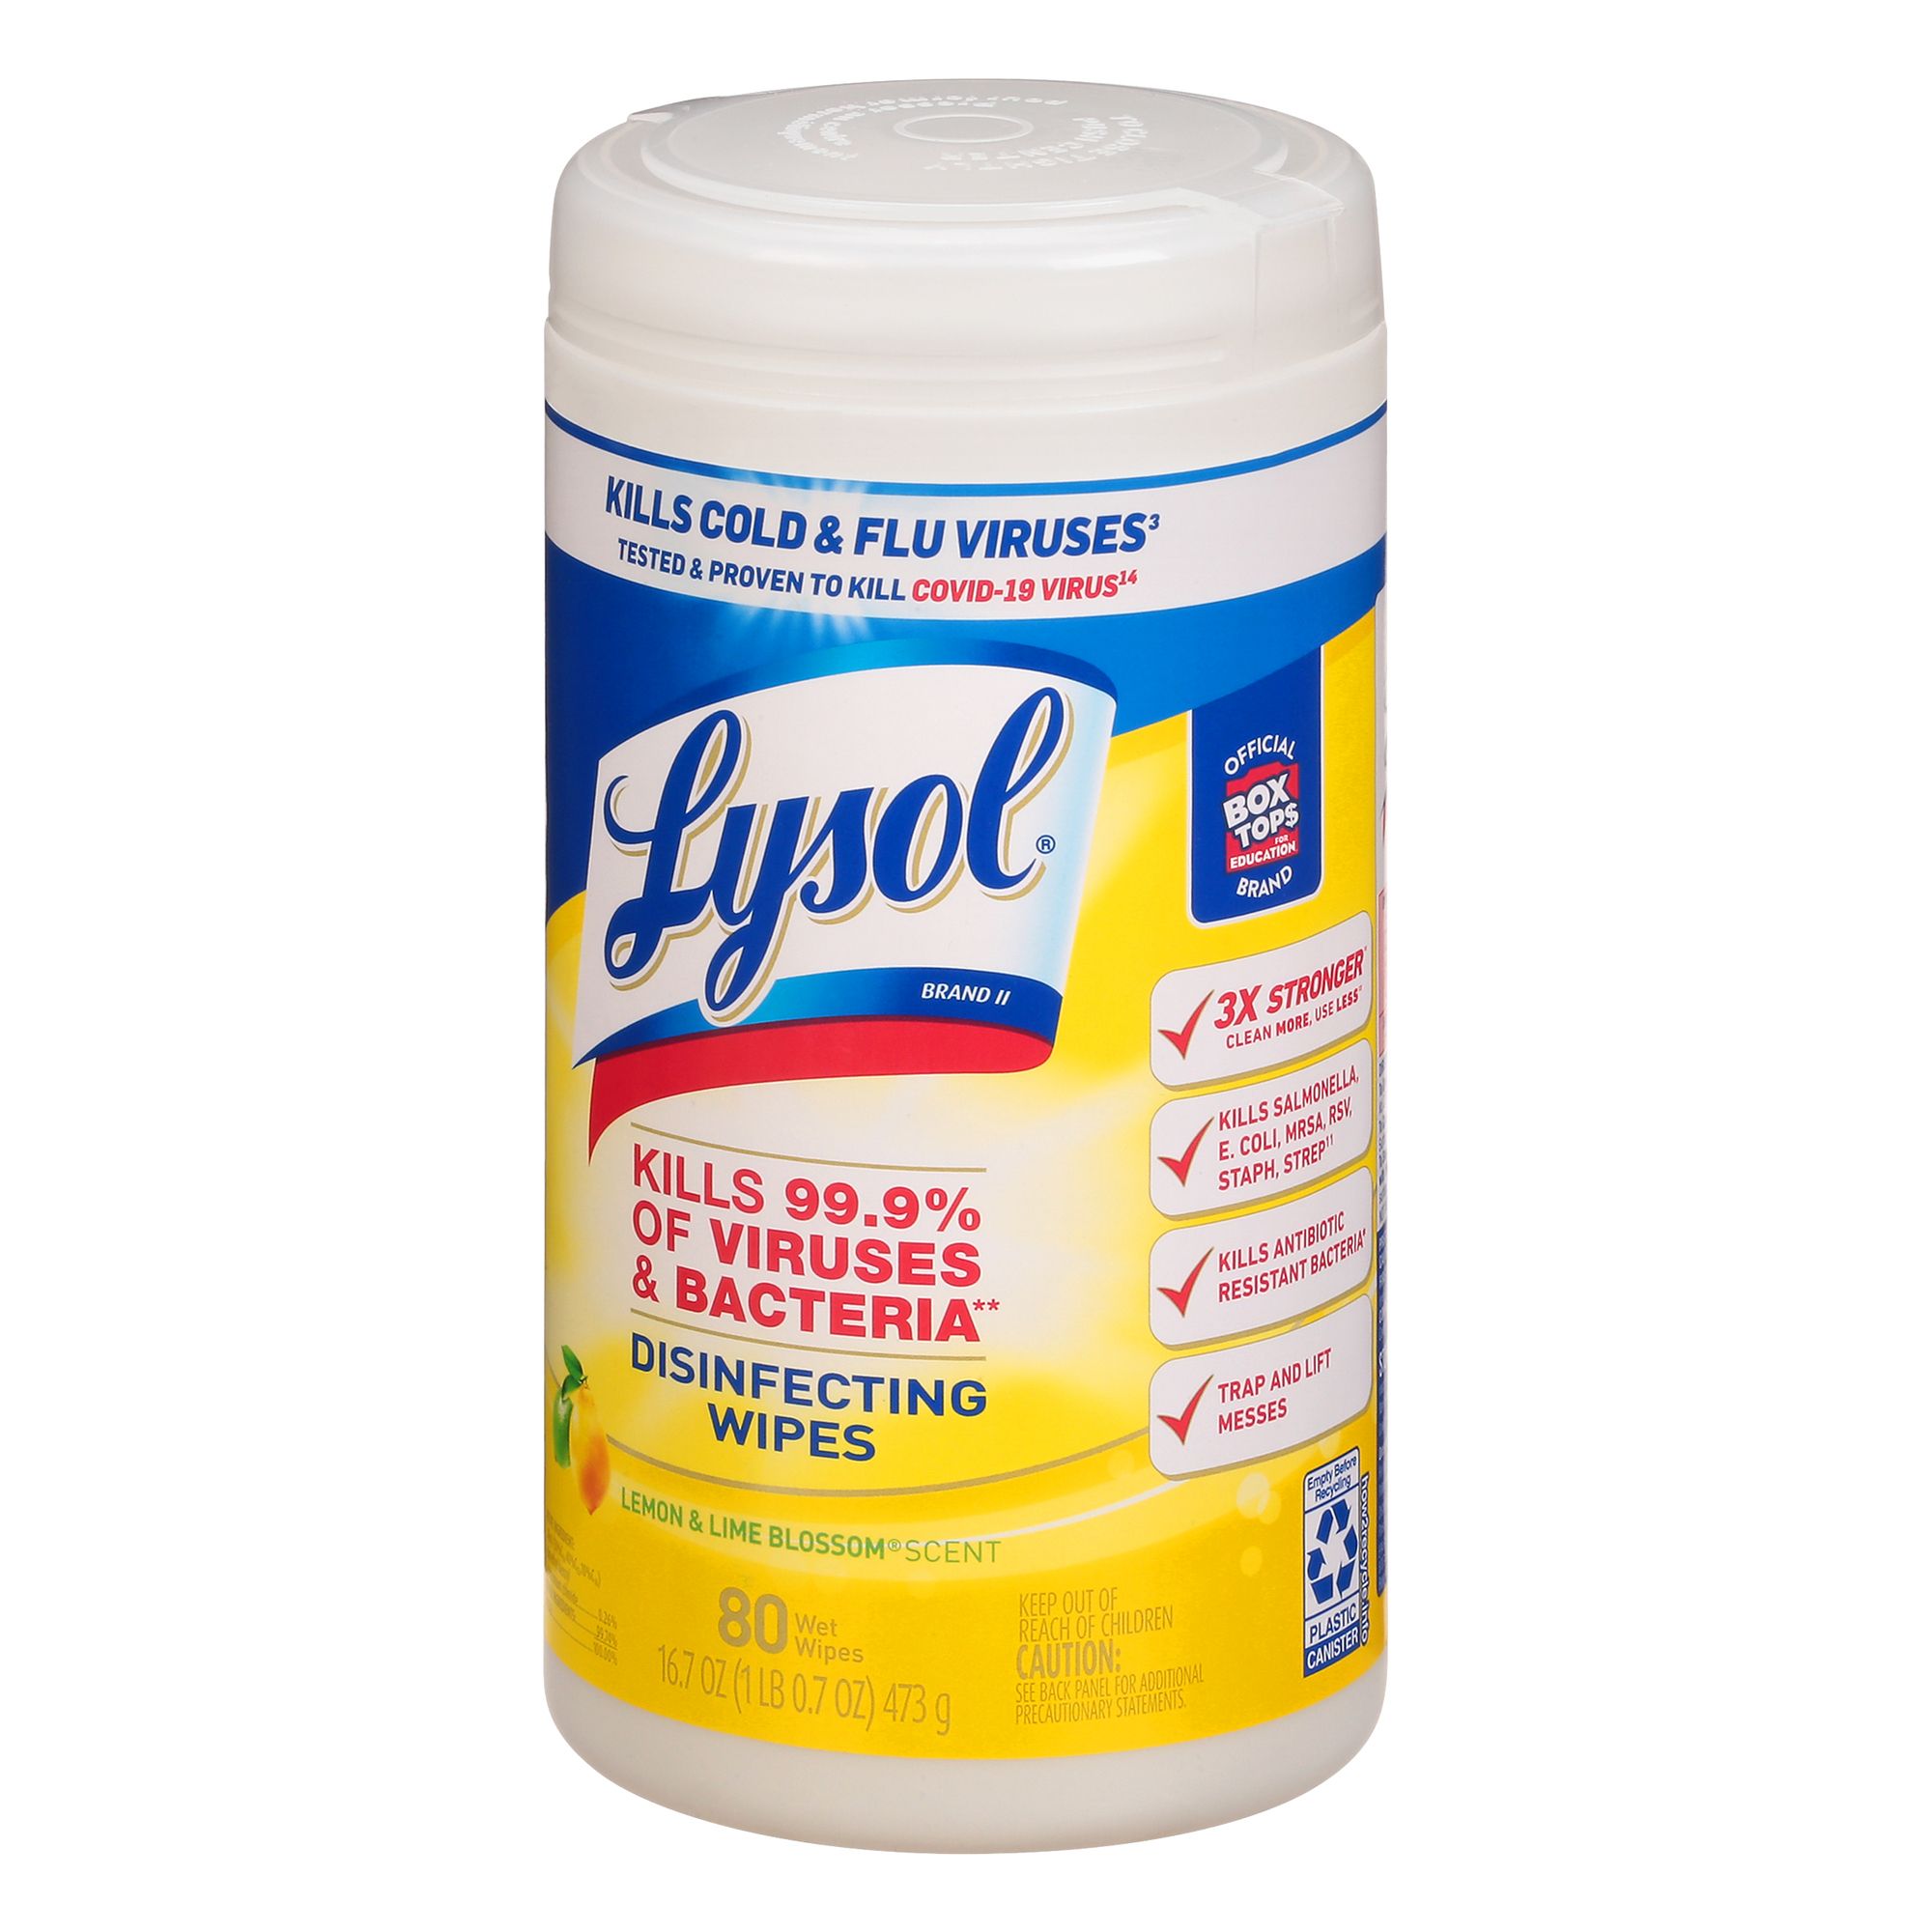 https://www.supplyden.com/images/products/large/CB771822_LYSOL_DIS_WIPES%20_LMN_&_LM_BLSSM_%206X80CT_Right_2000x2000.jpg